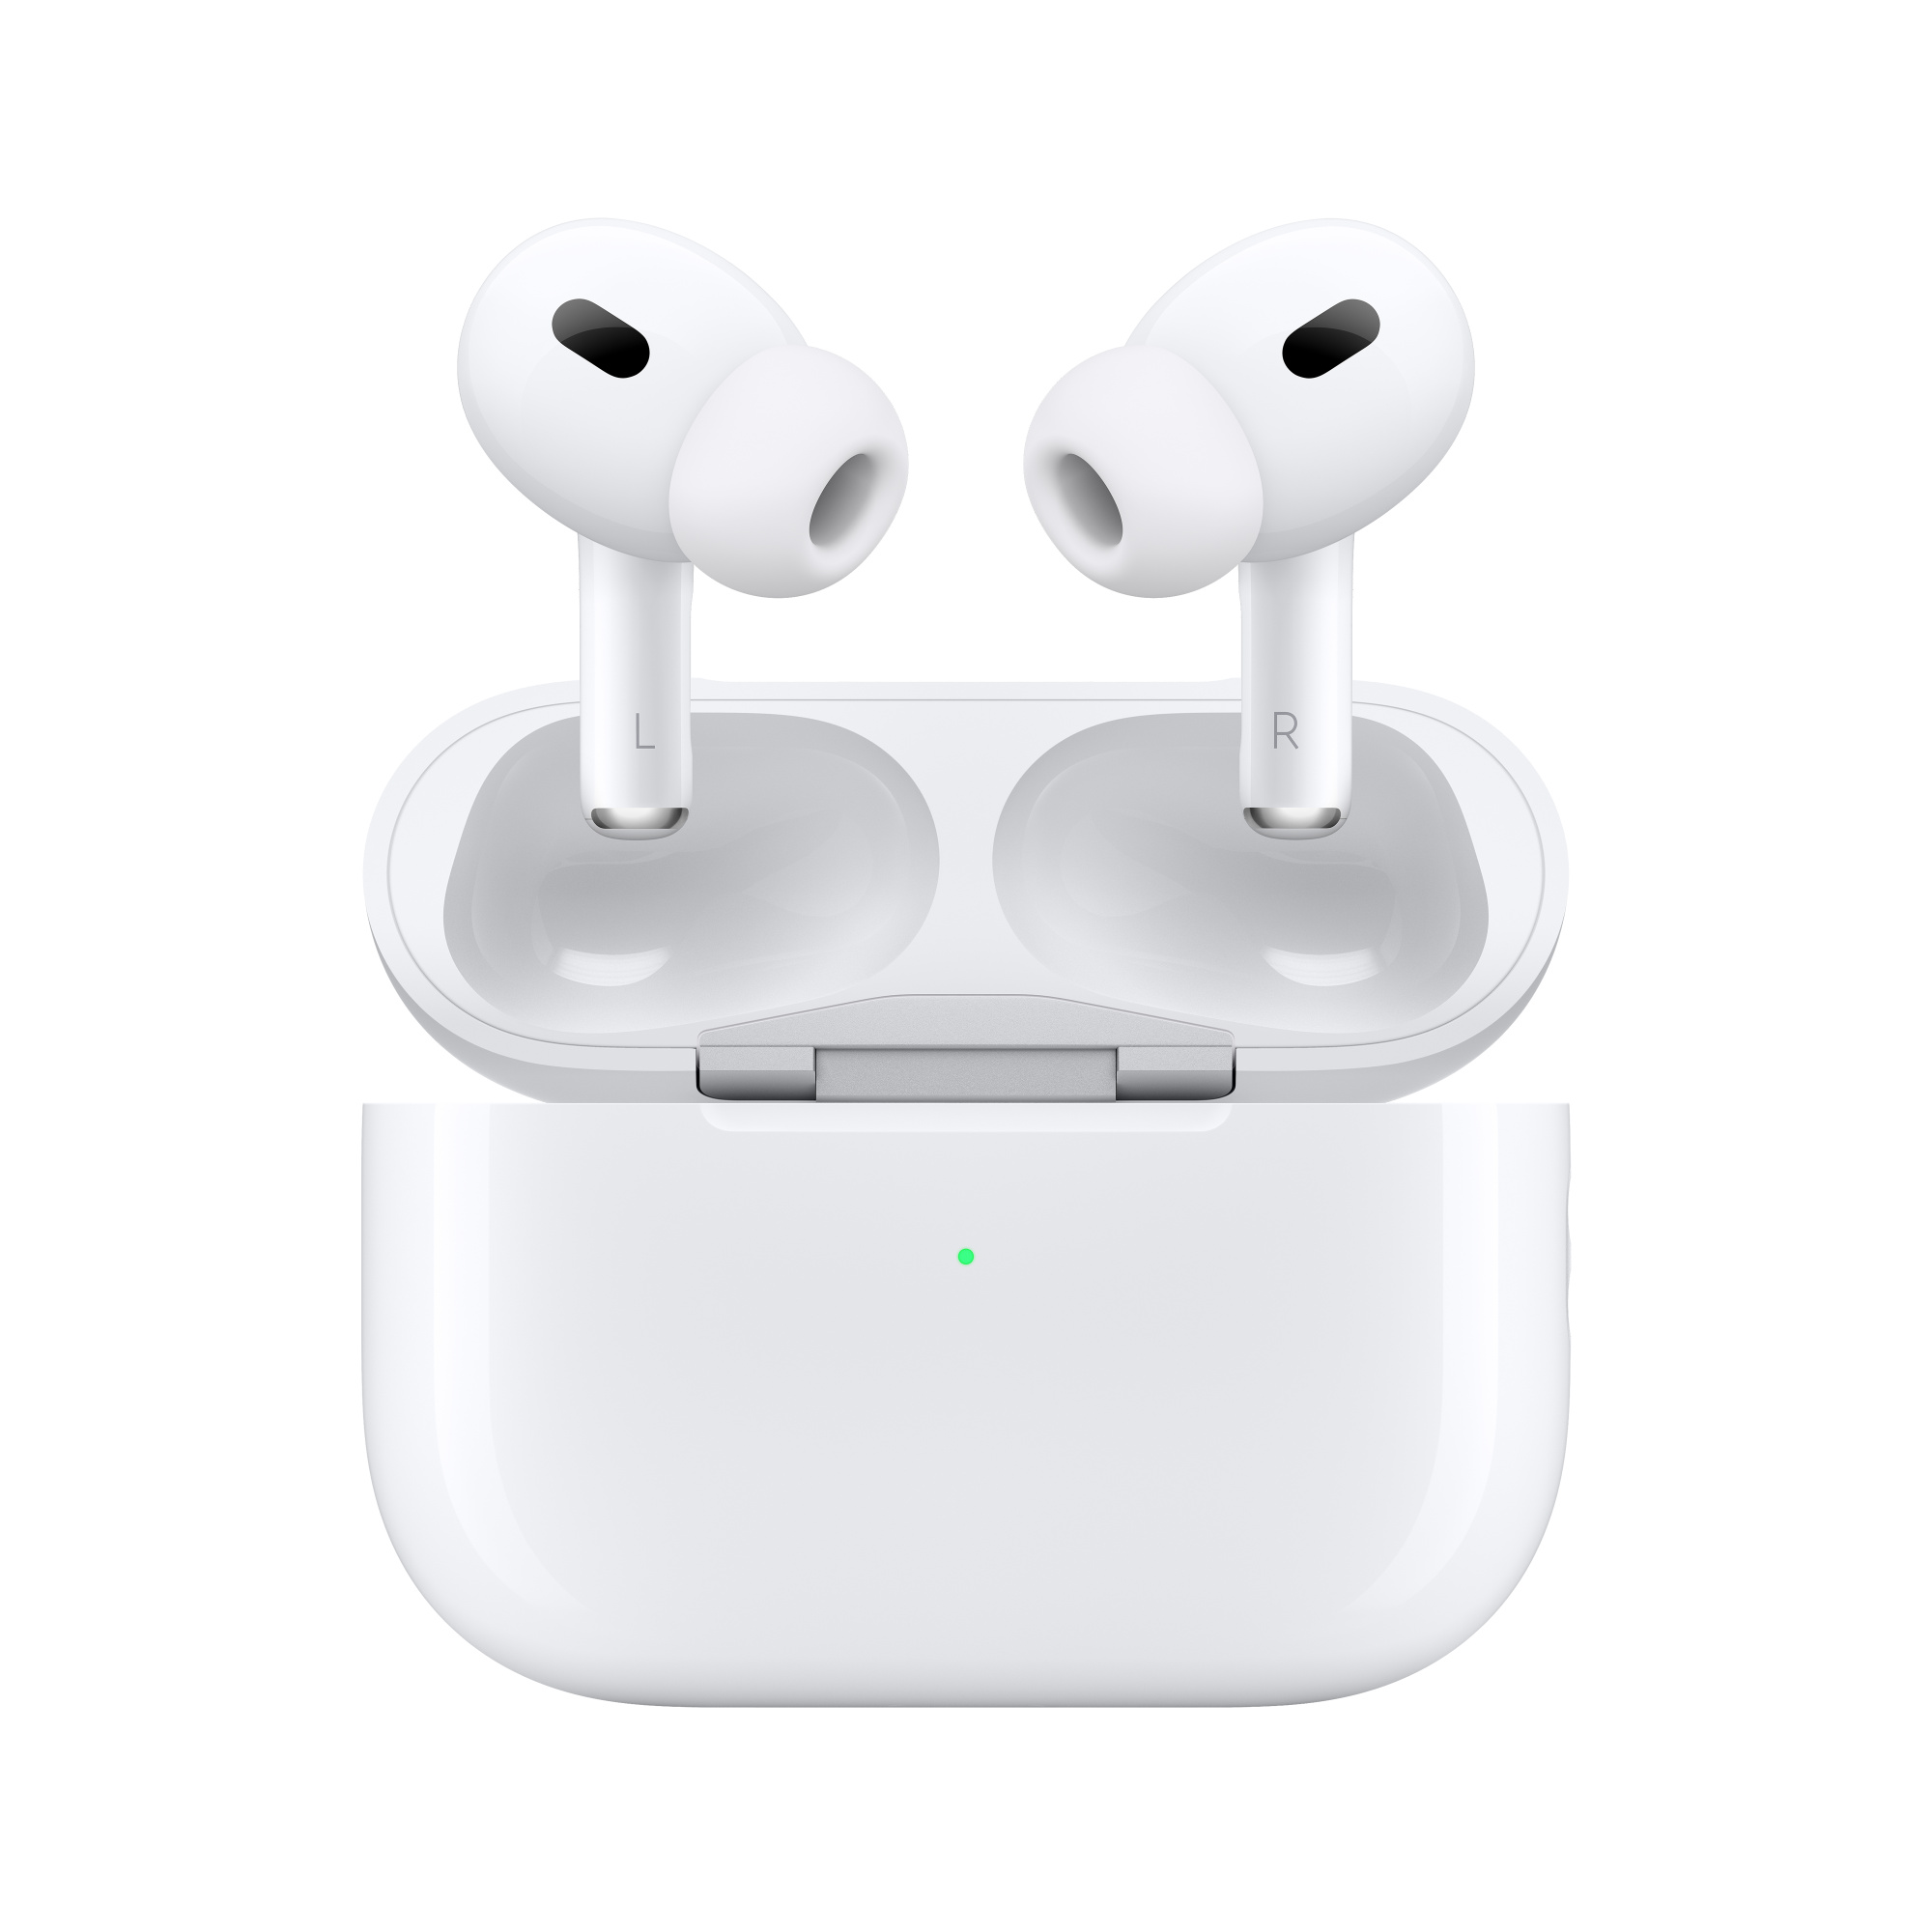 Apple-AirPods-3rd-generation-with-Lightning-Charging-Case